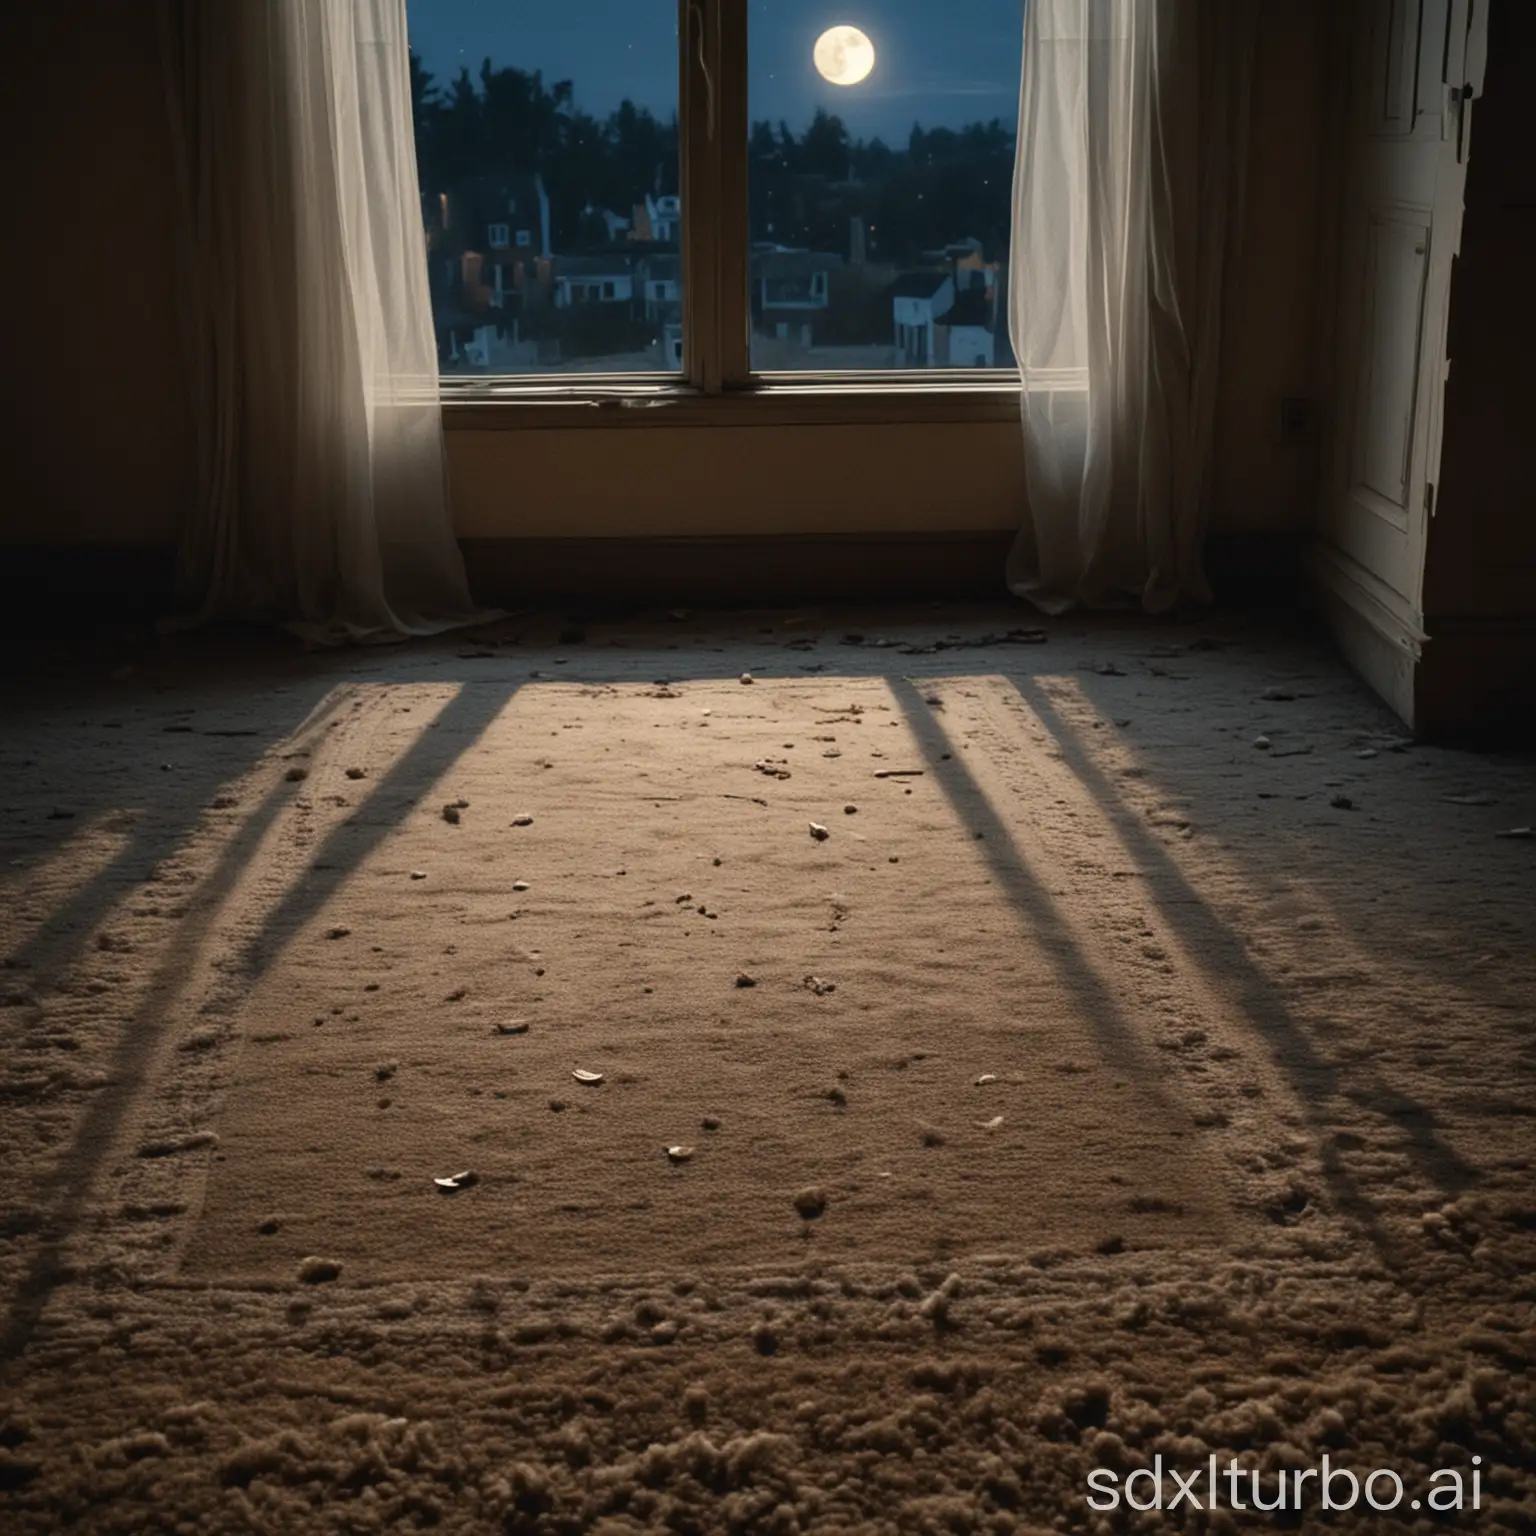 Moonlit-Room-with-WornOut-Carpet-and-Full-Moon-Outside